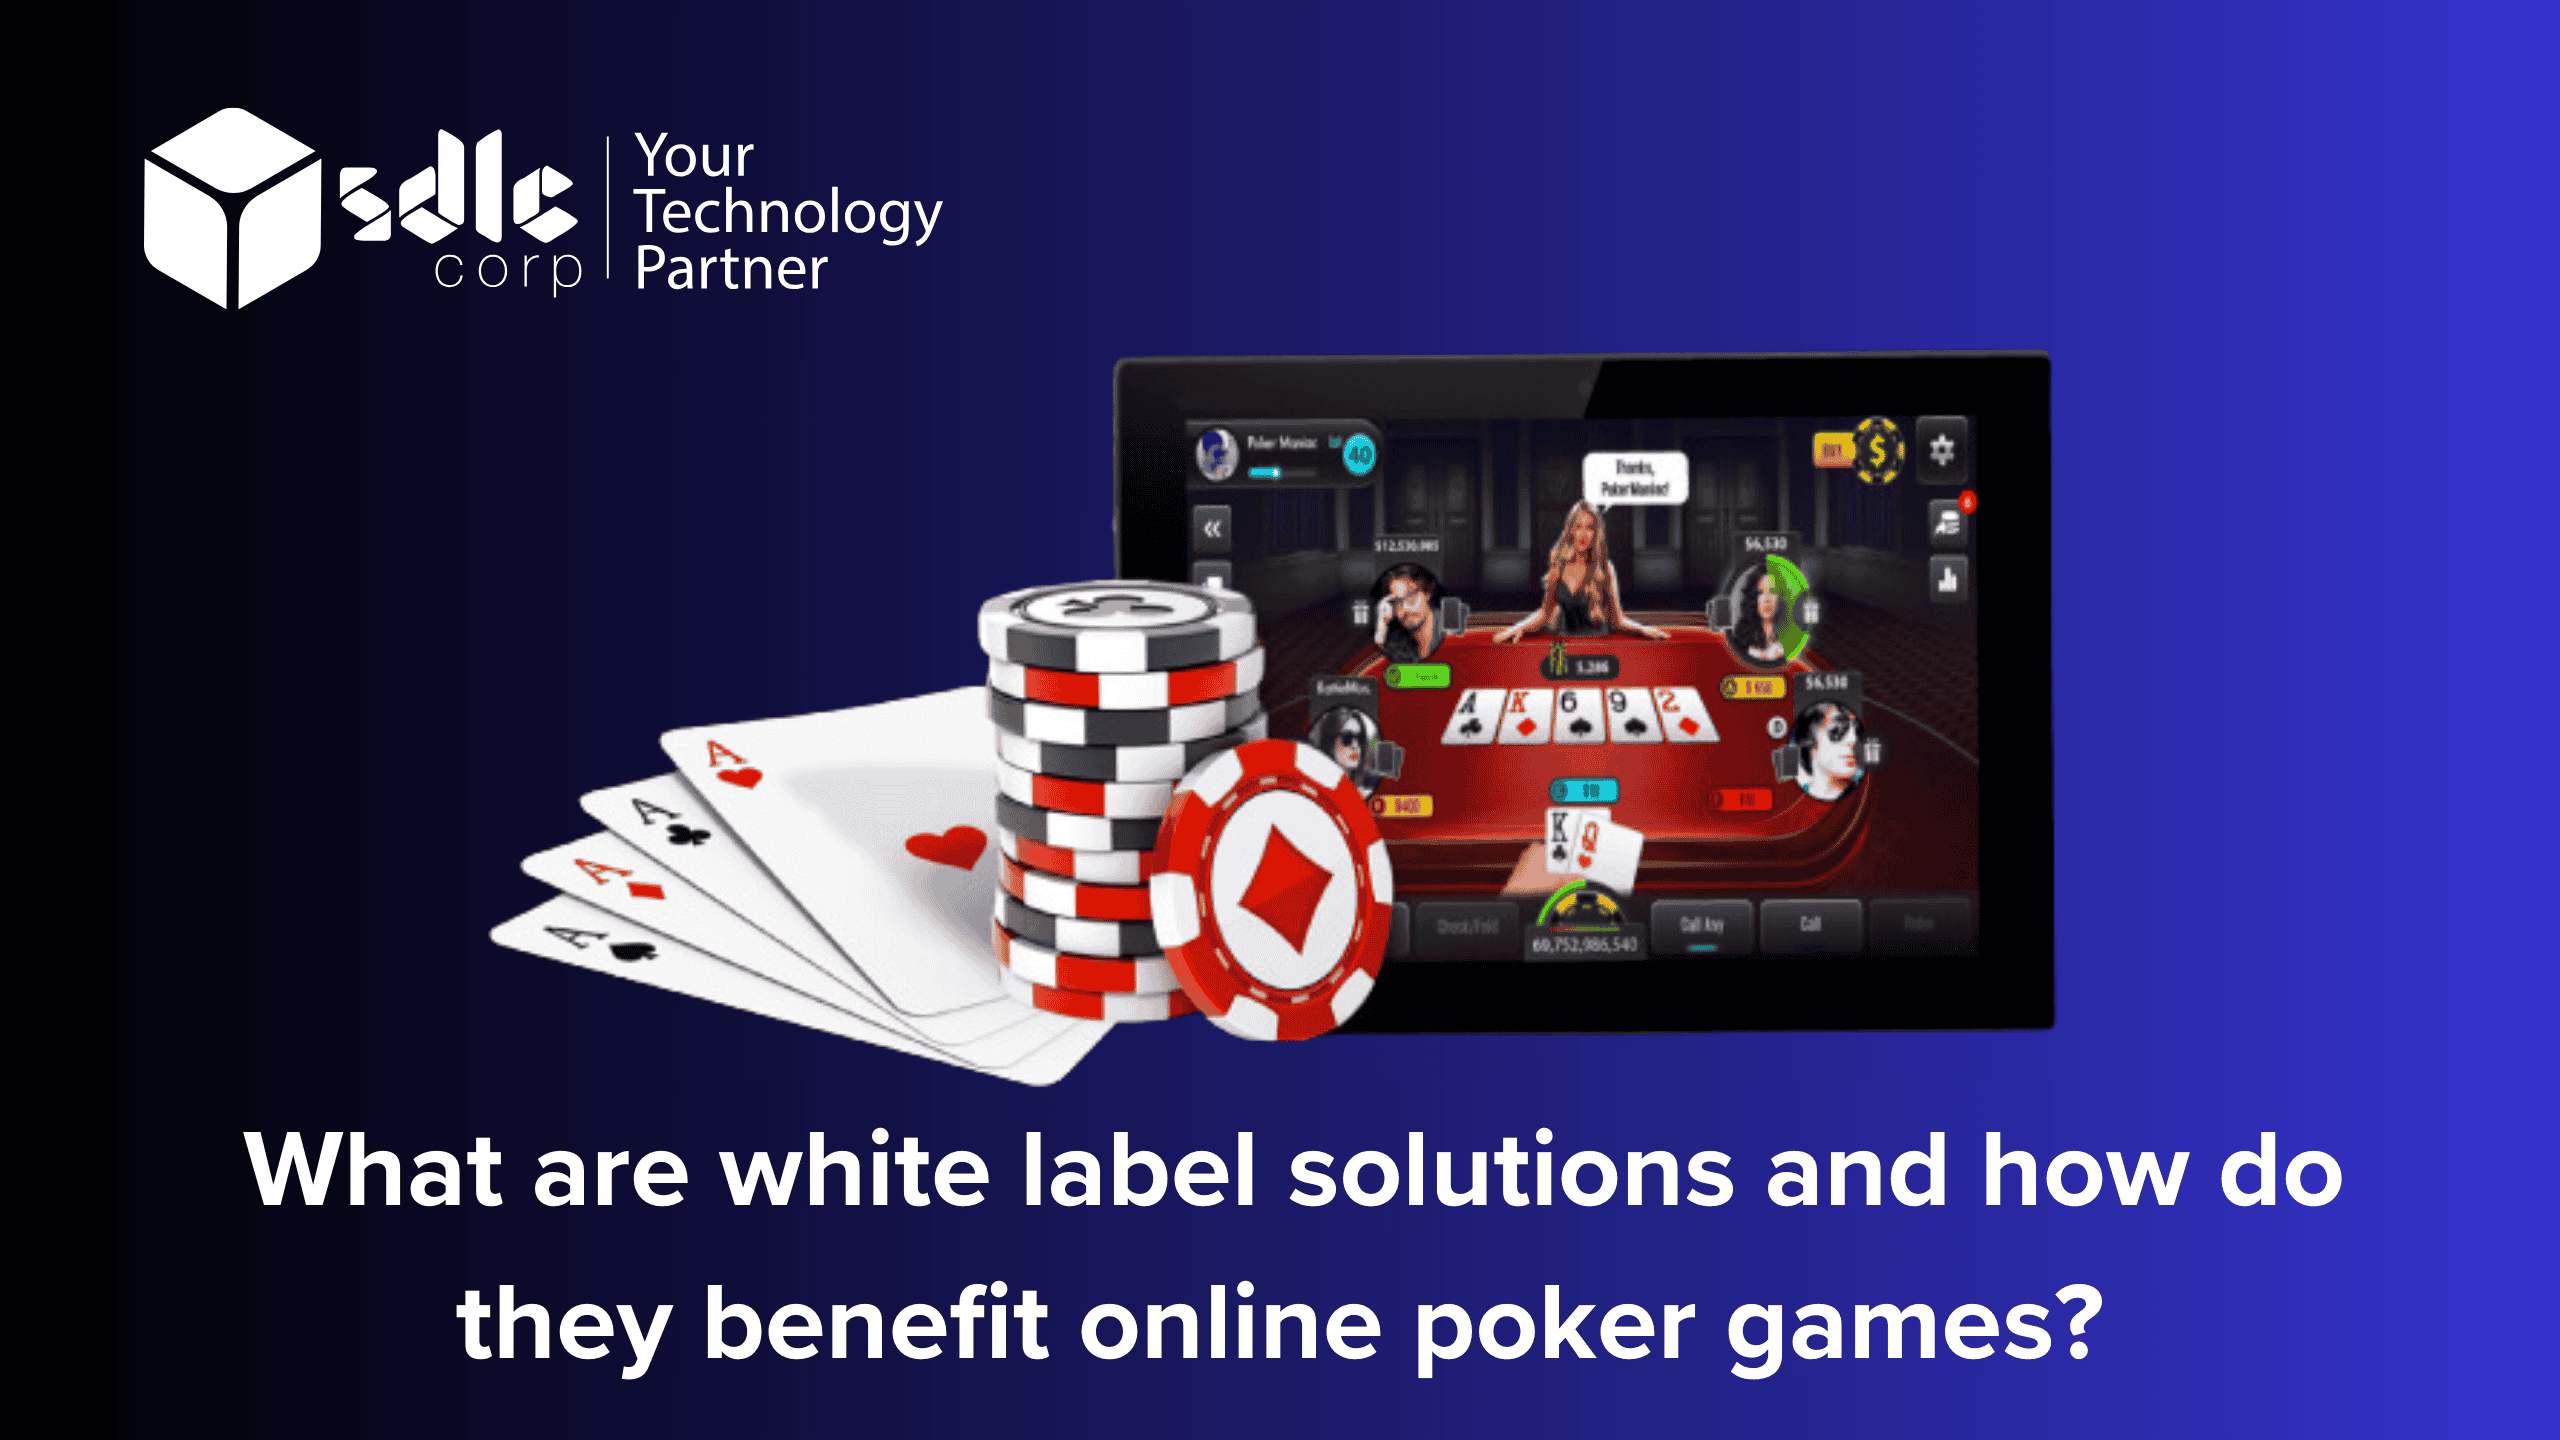 What are white label solutions and how do they benefit online poker games?